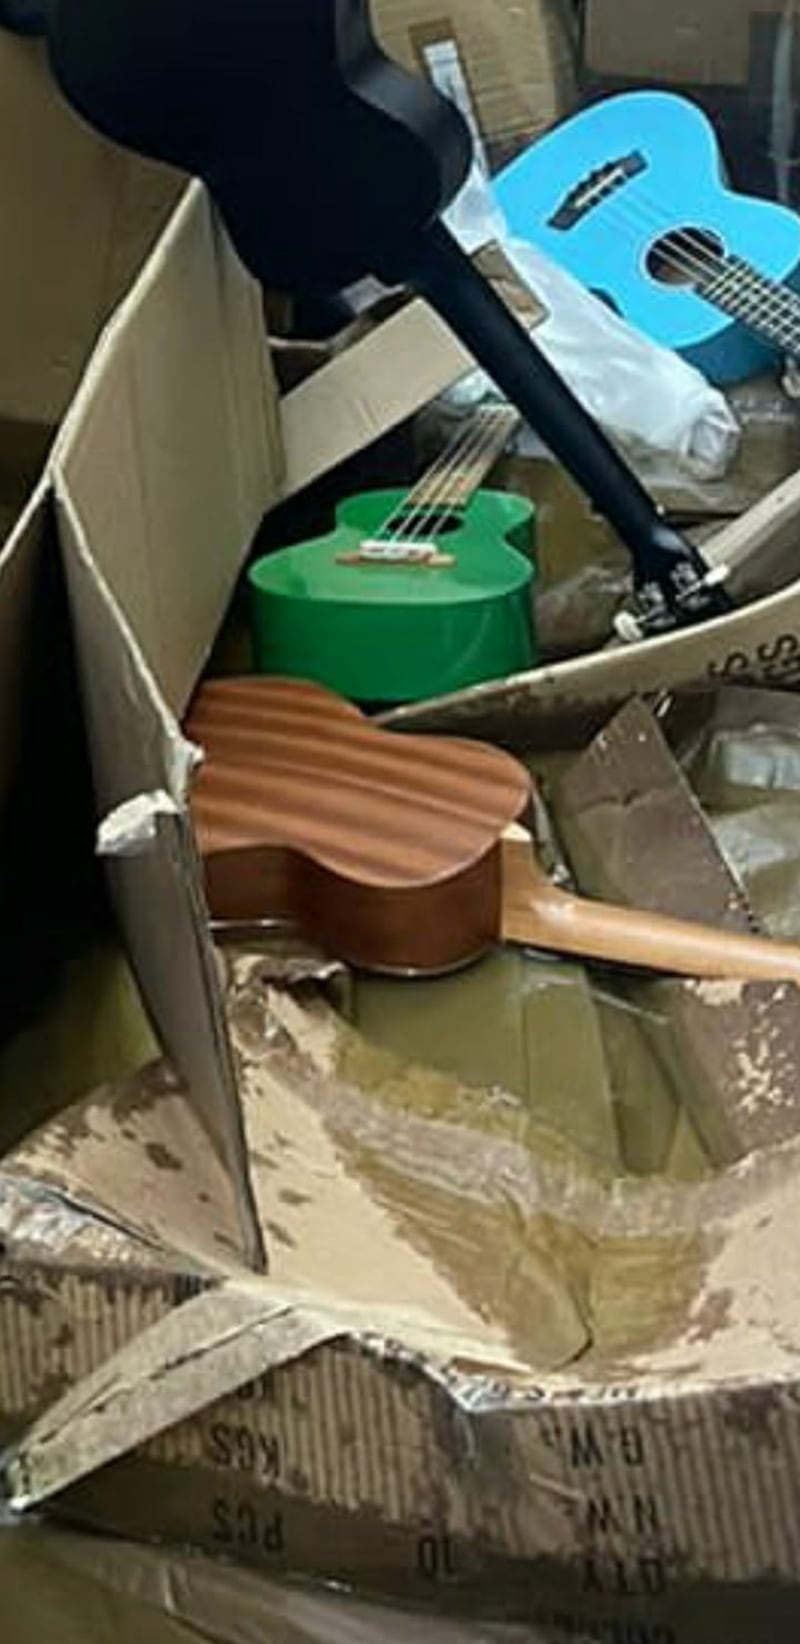 The floods have caused serious damage to instruments at the Dandana Musical Instruments Establishment in Sharjah.